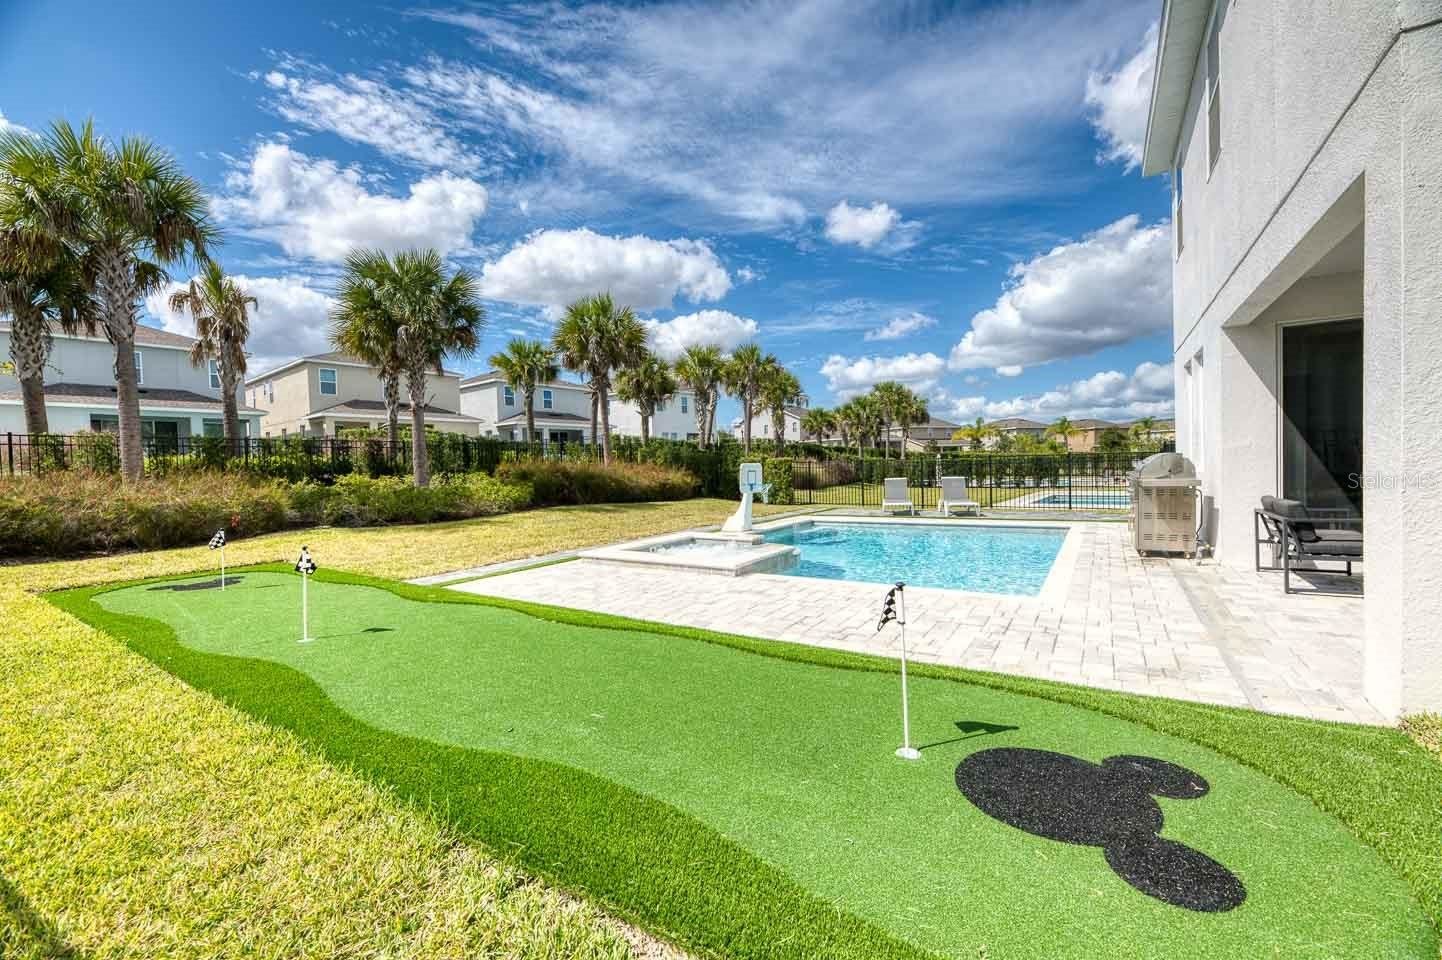 backyard with mickey putting green and pool